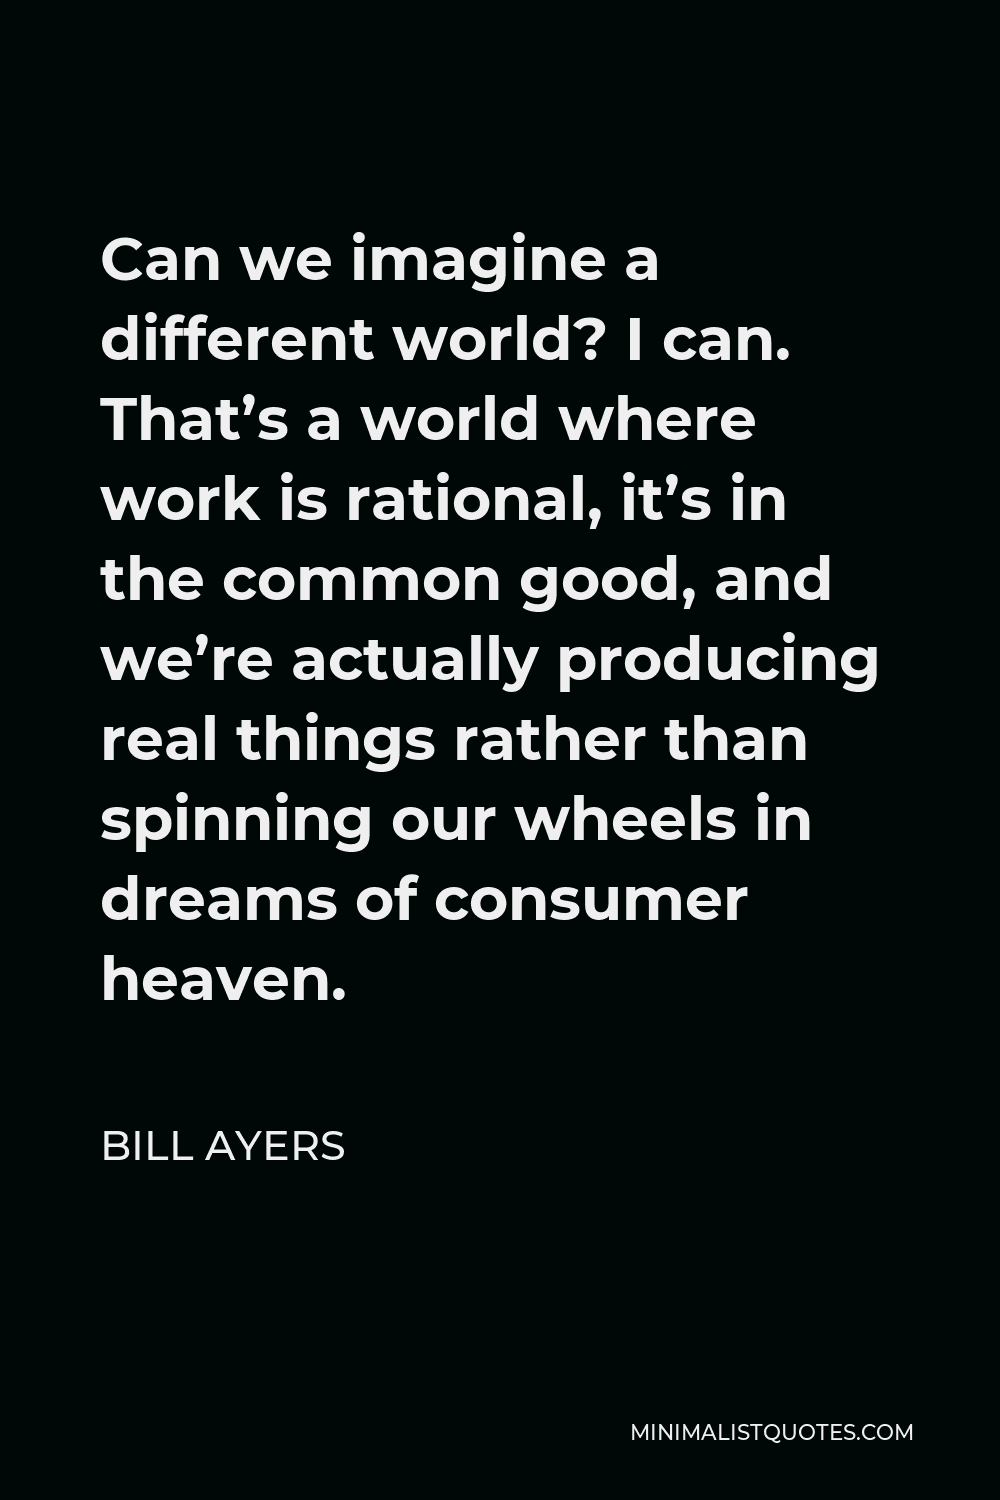 Bill Ayers Quote - Can we imagine a different world? I can. That’s a world where work is rational, it’s in the common good, and we’re actually producing real things rather than spinning our wheels in dreams of consumer heaven.